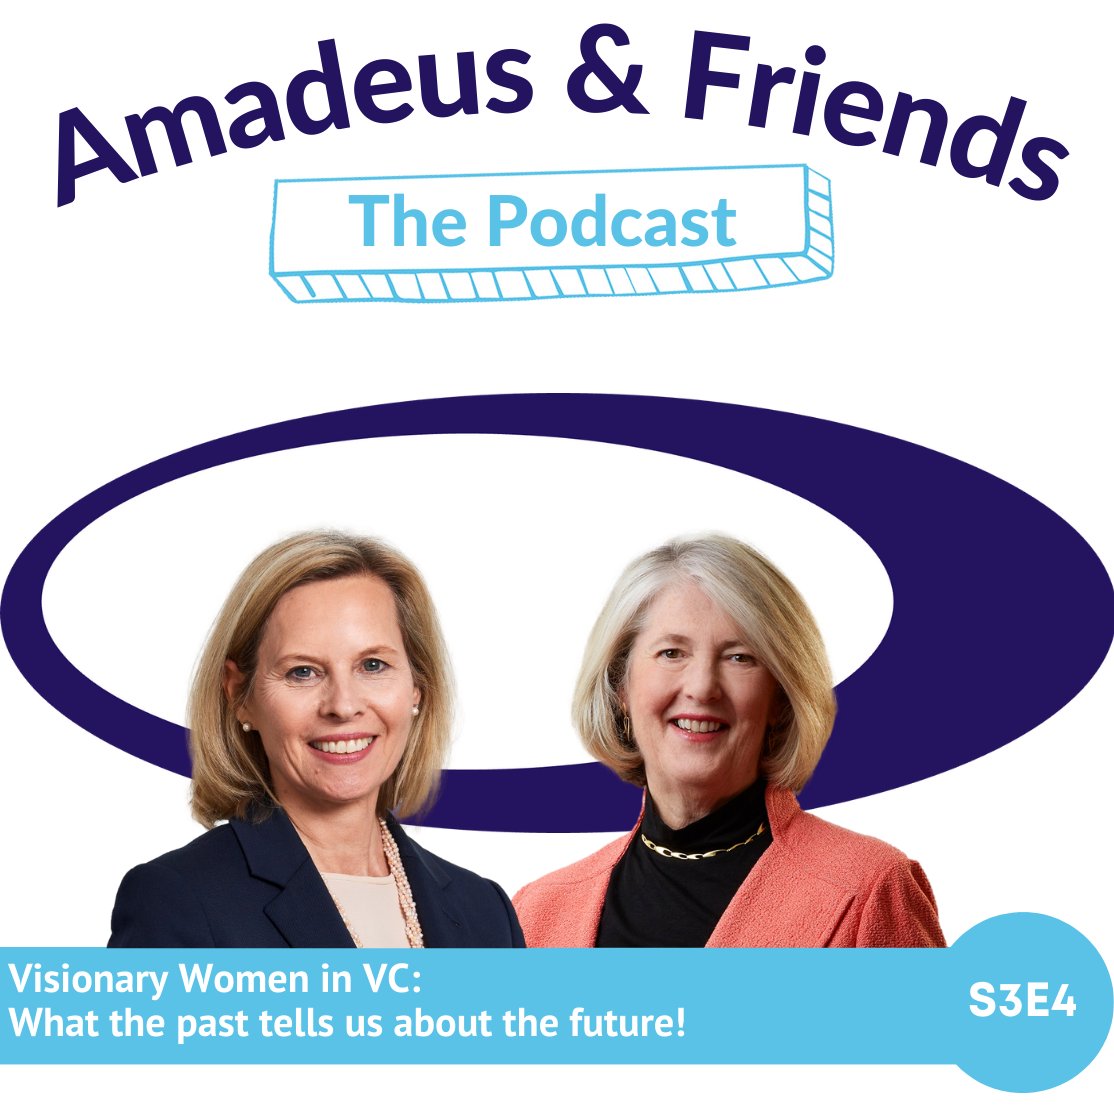 New Podcast Alert! Former CEO of @BPatientCap, Catherine La Torre, shares insights on the UK venture capital industry in our latest episode of Amadeus and Friends. Tune in for expert perspectives on industry dynamics and future trends. Listen here: amadeuscapital.com/visionary-wome…